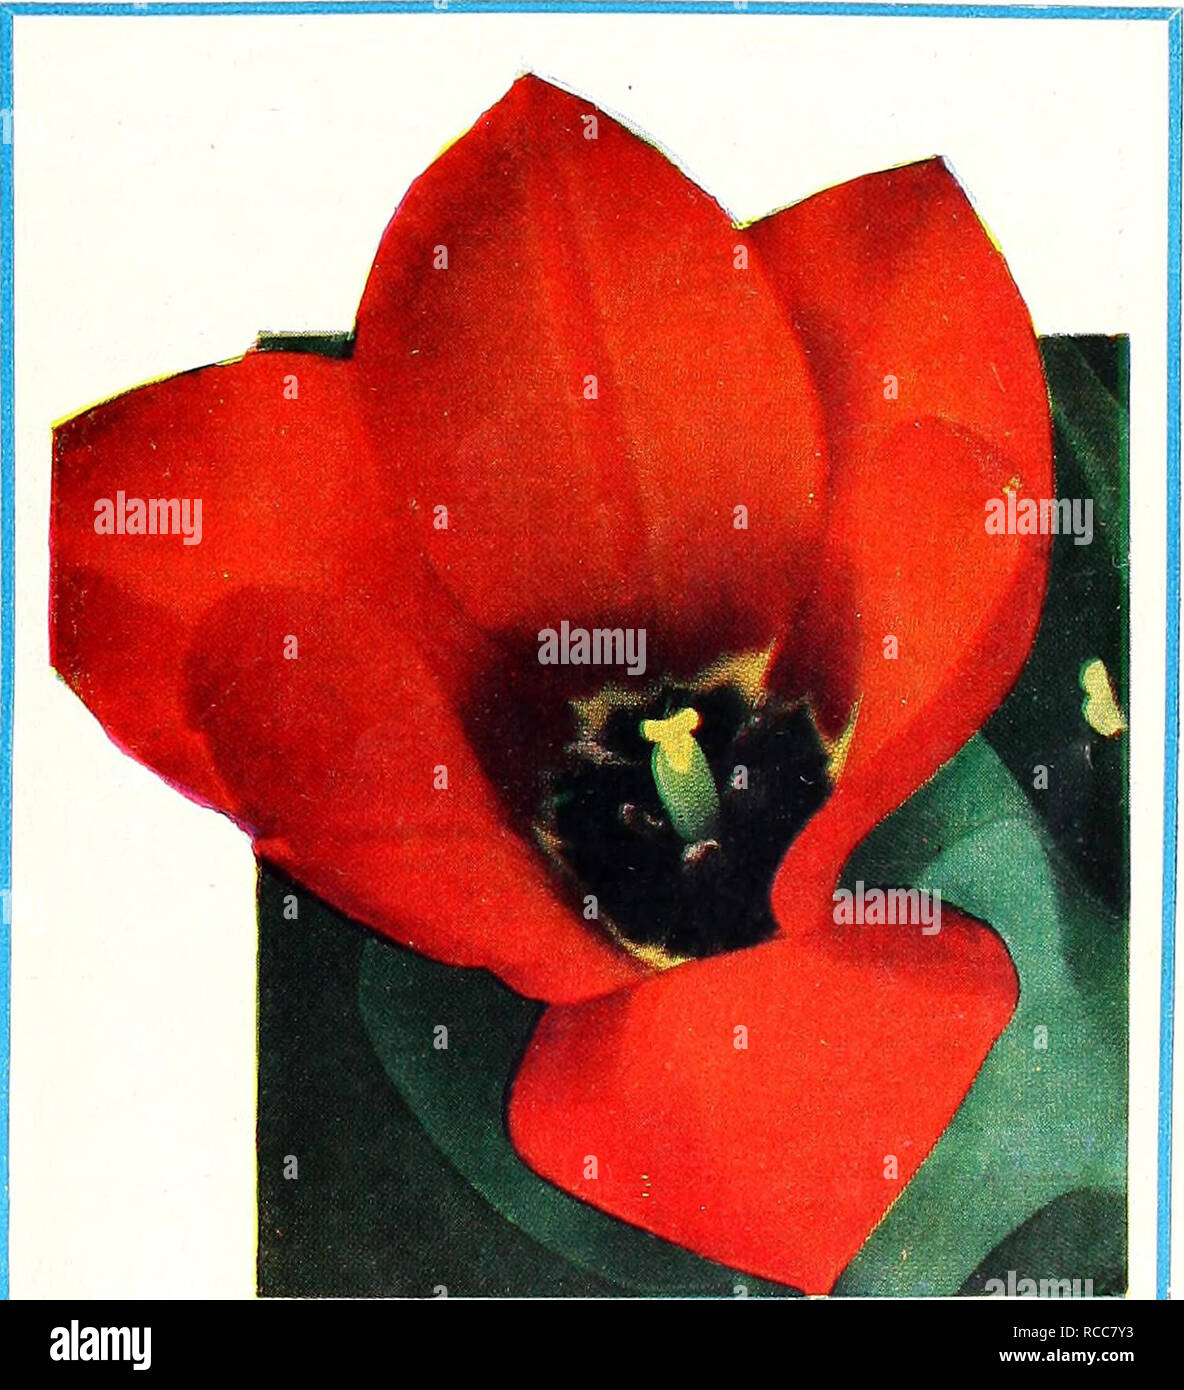 . Dreer's 1951 autumn catalog for spring beauty. Bulbs (Plants) Catalogs; Flowers Seeds Catalogs; Gardening Equipment and supplies Catalogs; Nurseries (Horticulture) Catalogs; Vegetables Seeds Catalogs. TULIP HARMONY . I Selections of I^iay'Flowering Beauties DARWIN . COTTAGE • BREEDER • REMBRANDT All Varieties: 5 for 60c; 10 for $1.15; 25 for $2.60 American Flag. (Rembrandt.) Bright red of luscious richness combined with white to make a flower of un- usual beauty and appeeJ. 24 in. BT 201 A. Aristocrat. (Darwin.) An enticing shade of violet-rose with a luminous sheen of soft purple. A real be Stock Photo